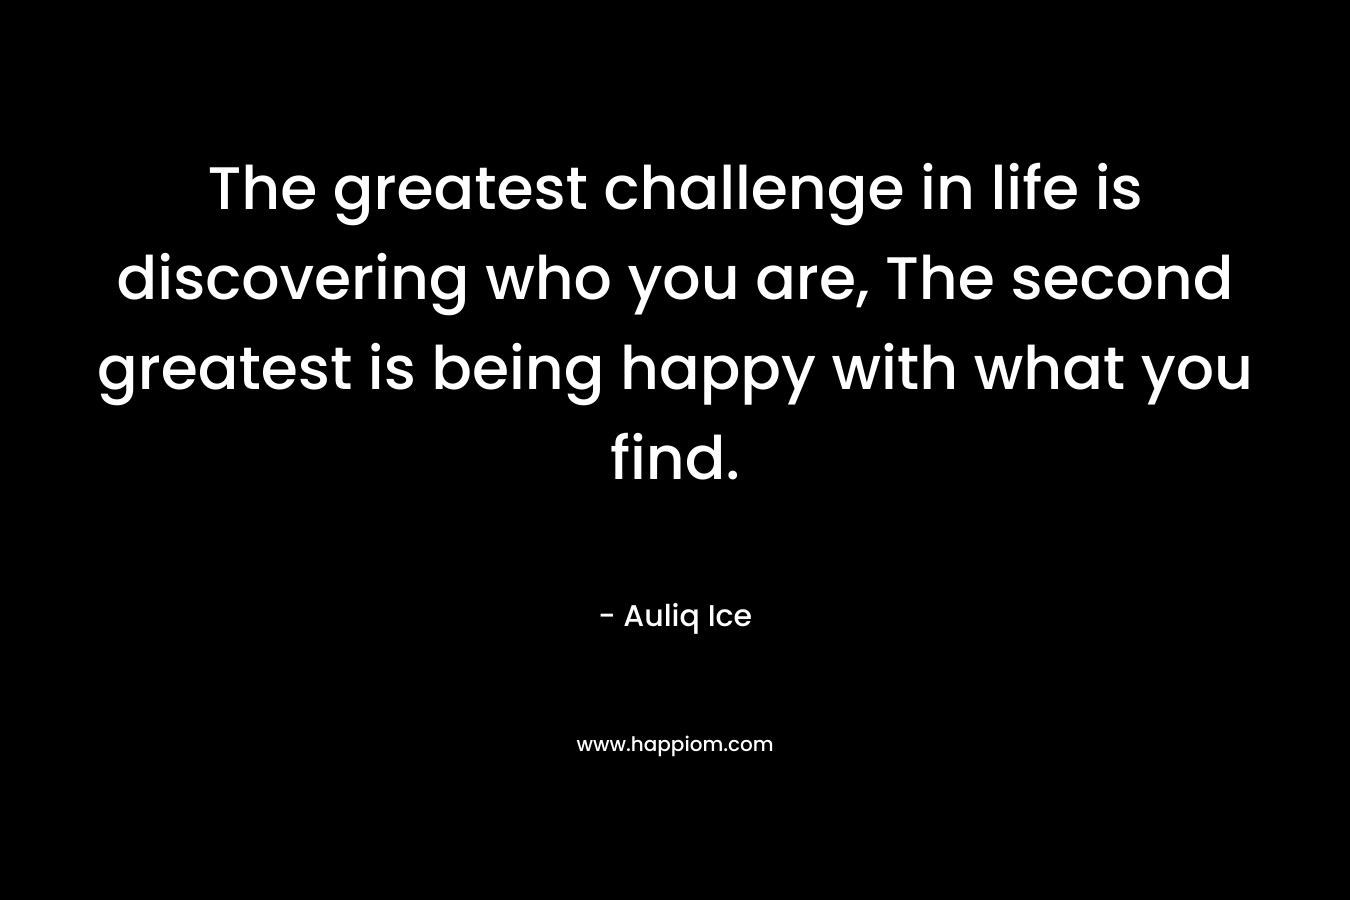 The greatest challenge in life is discovering who you are, The second greatest is being happy with what you find.